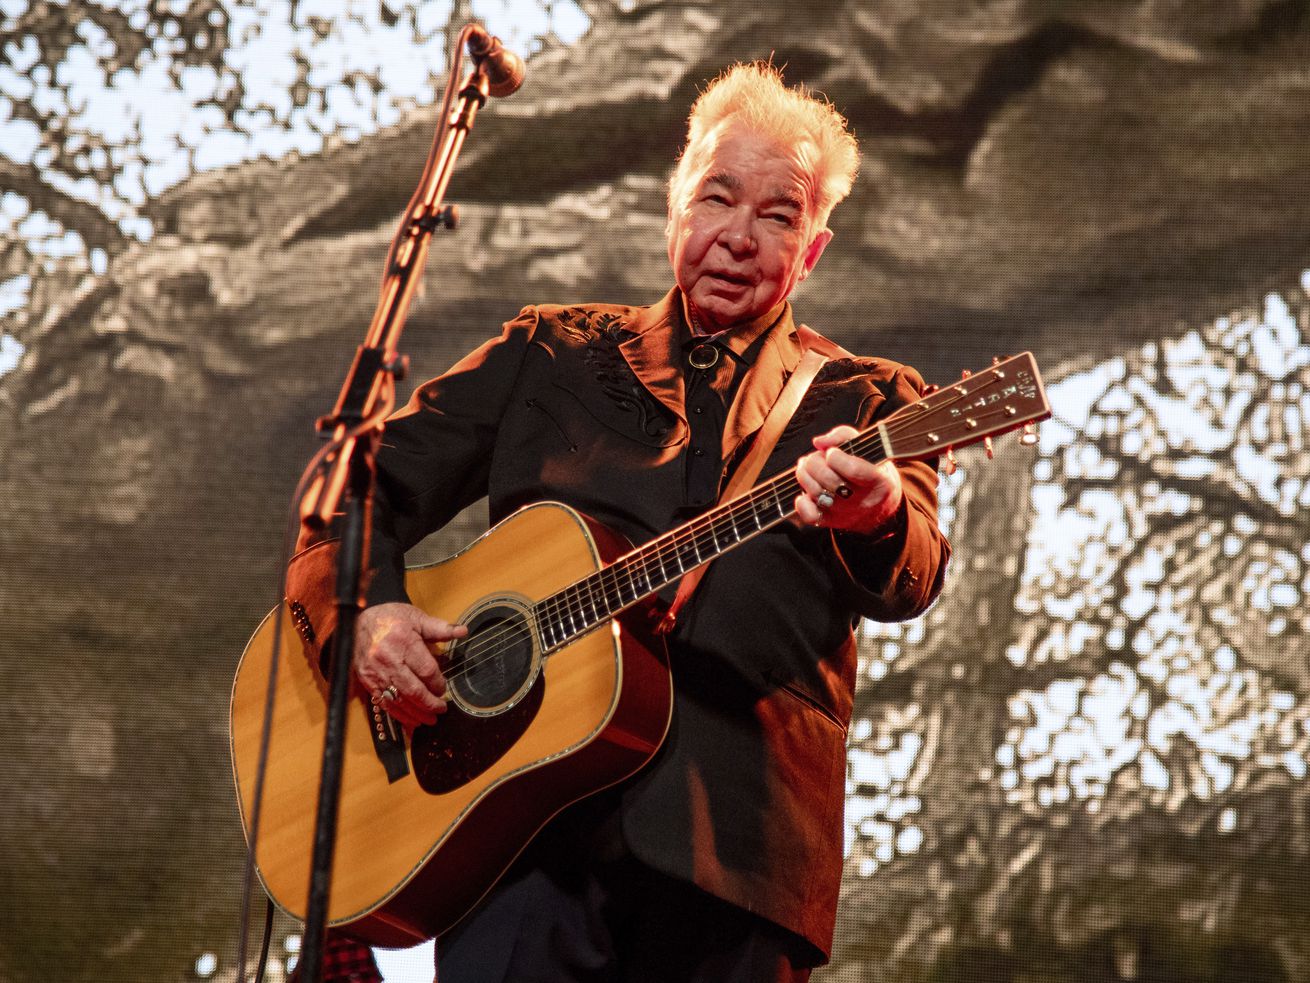 This June 15, 2019 file photo shows John Prine performing at the Bonnaroo Music and Arts Festival in Manchester, Tenn.